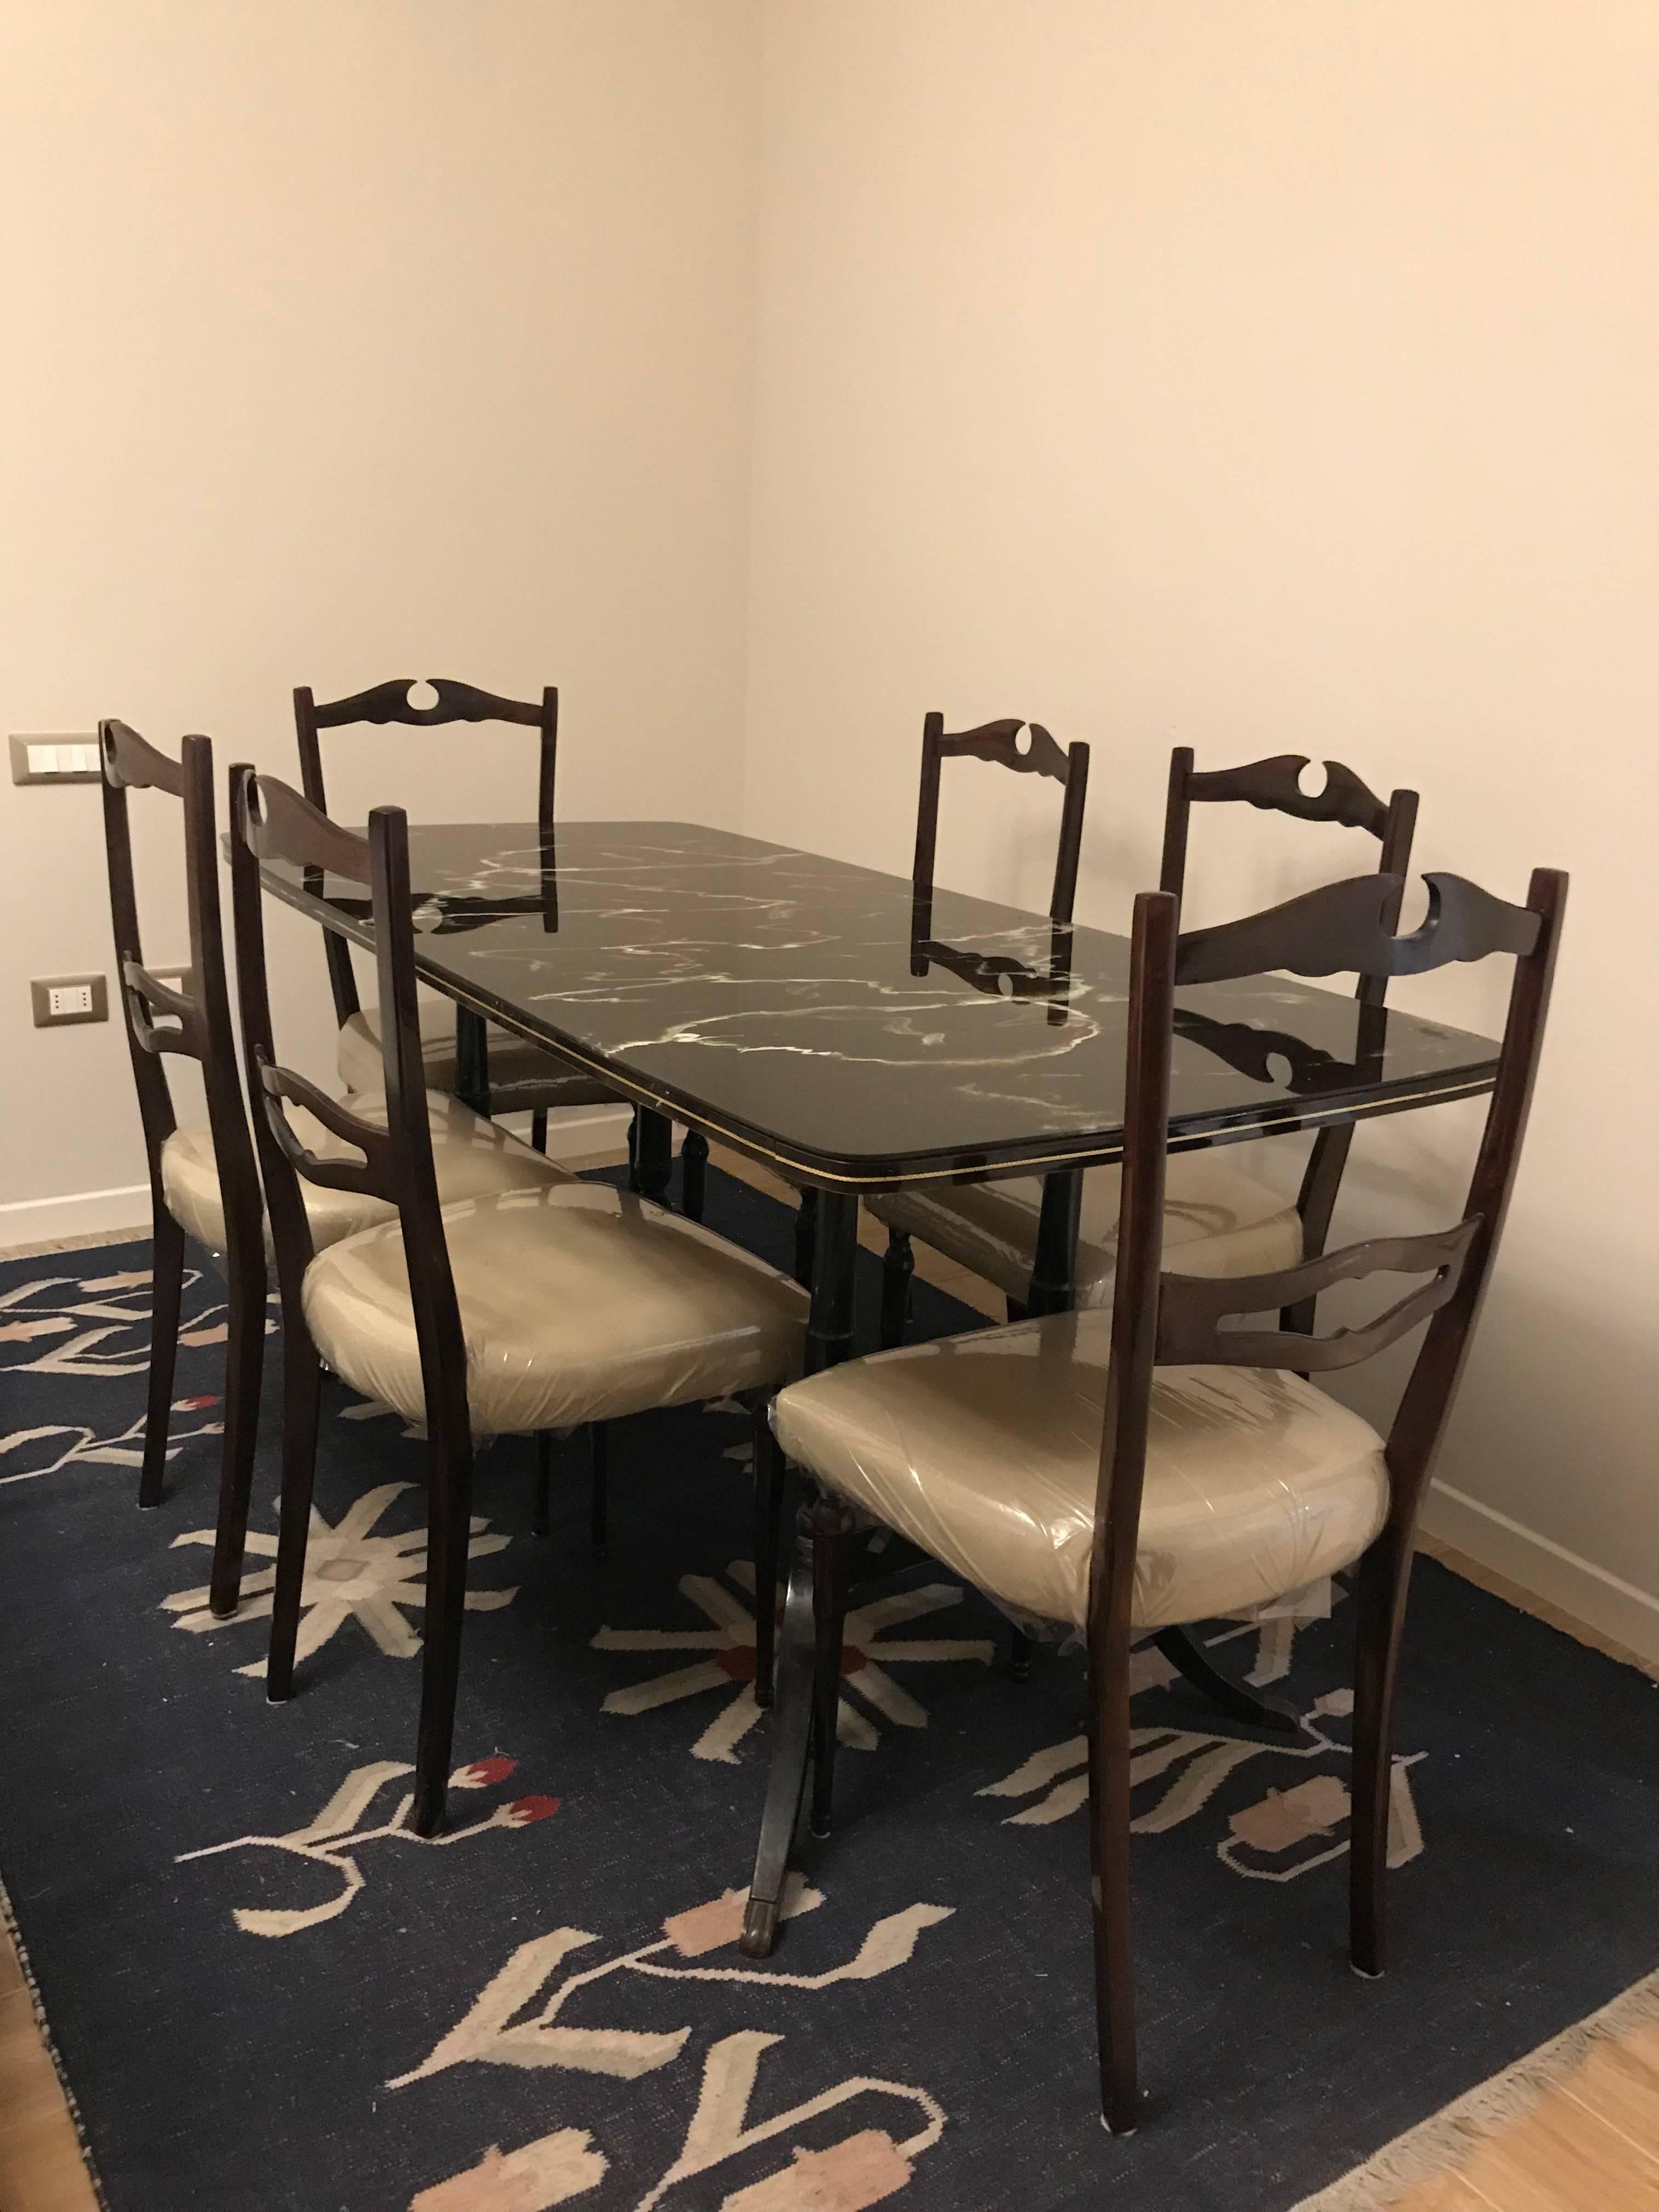 Amazing Mid-Century Modern dining room set consisting of a large table with a beautiful glass top and six chairs in ultimate condition!

Table measurements : 167 cm W, 77 cm D, 78 cm H

Chair measurements: 98 cm H, 43 cm W, 42 cm D, 46 cm seat